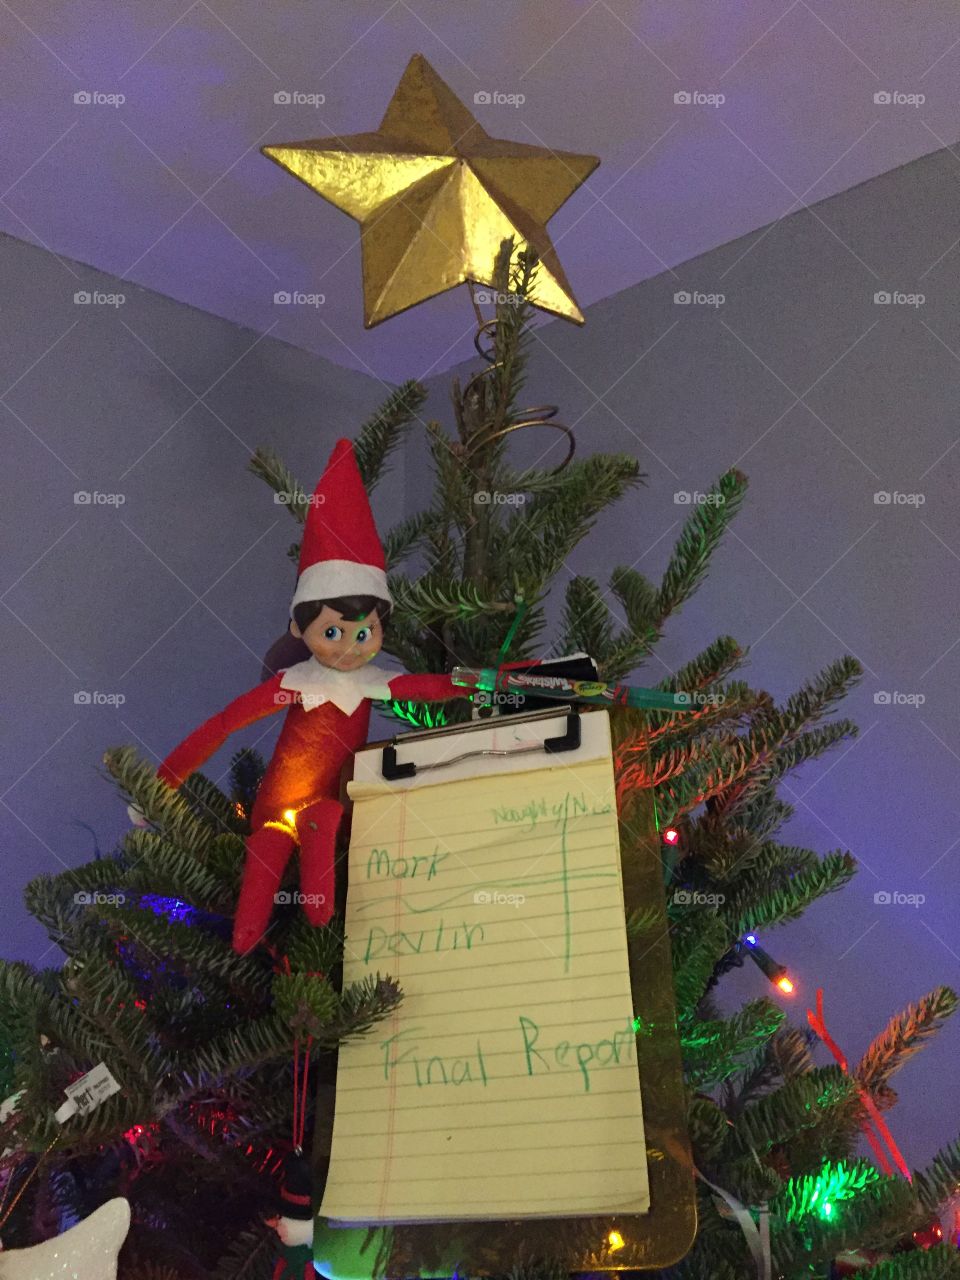 Elf on a shelf in Christmas tree for a final report on Christmas Eve